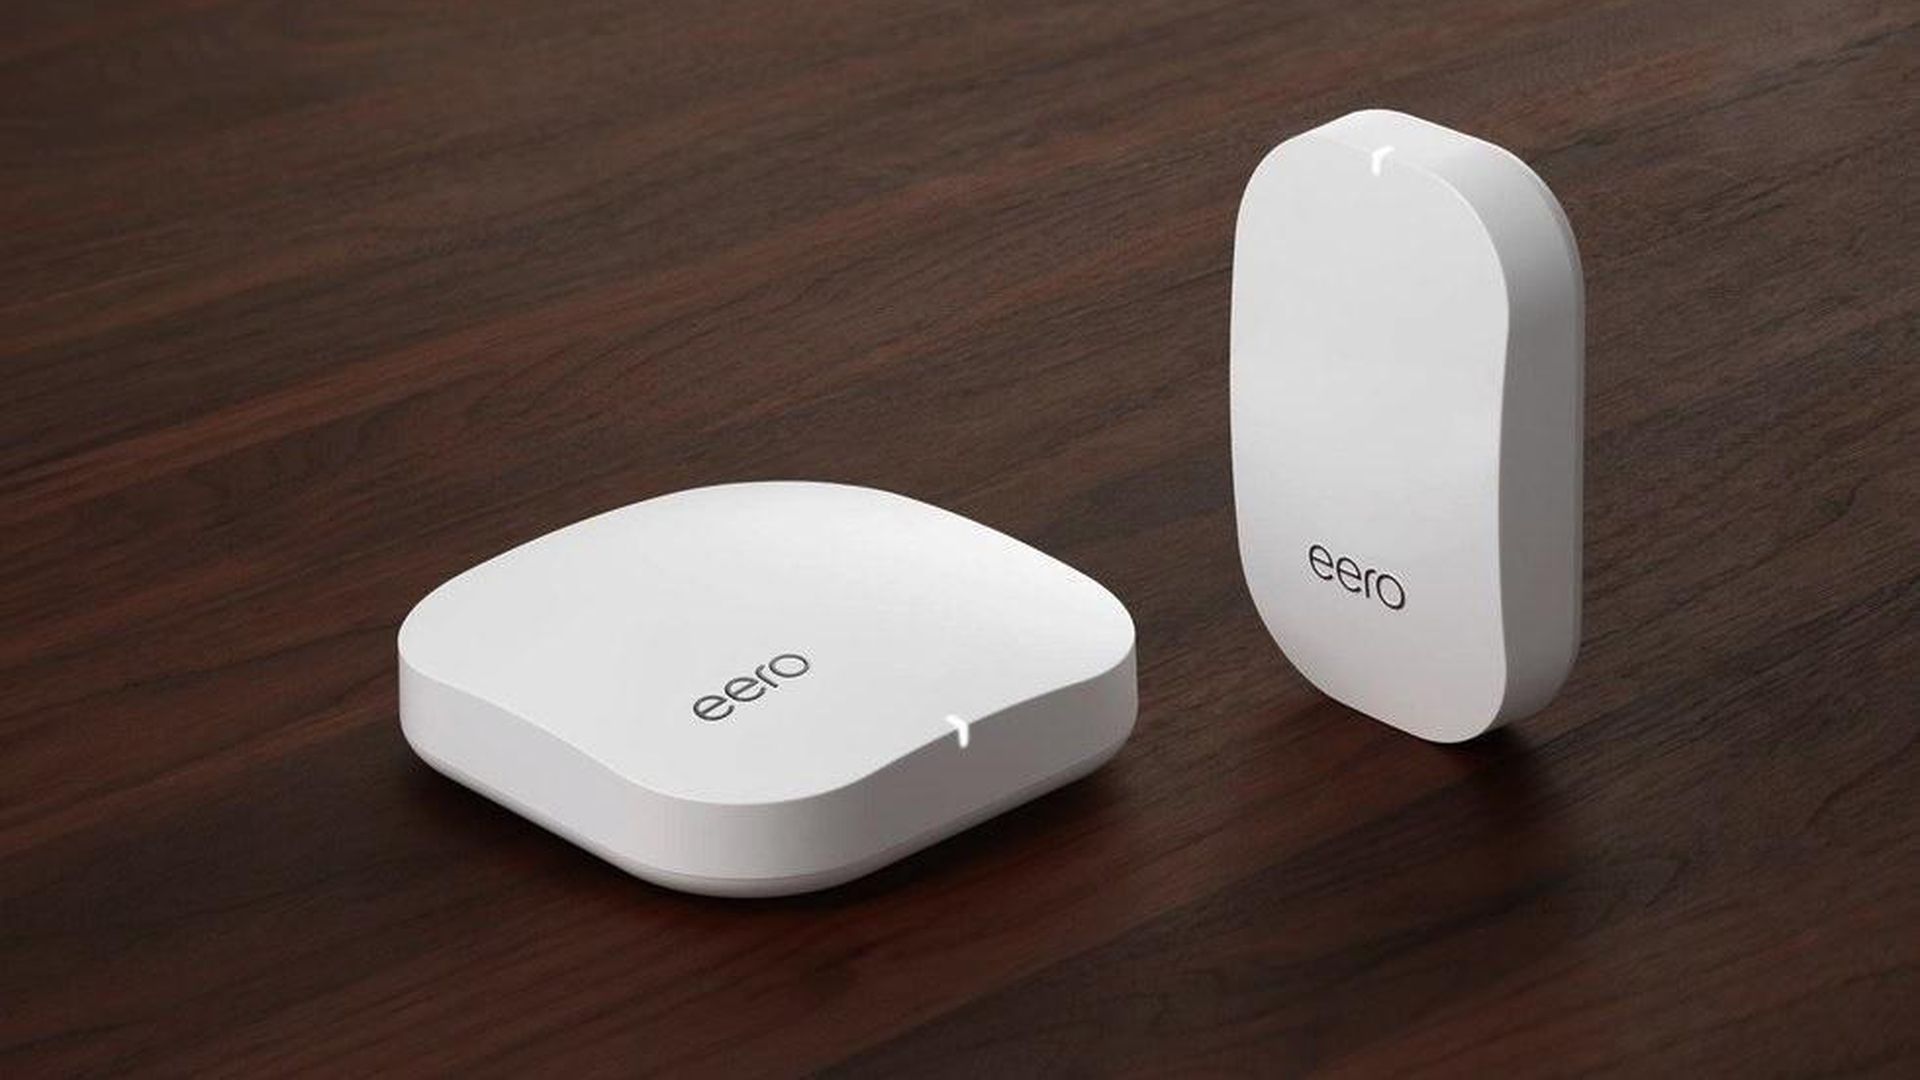 Eero's mesh routers make it easier to spread fast Wi-Fi throughout the home.